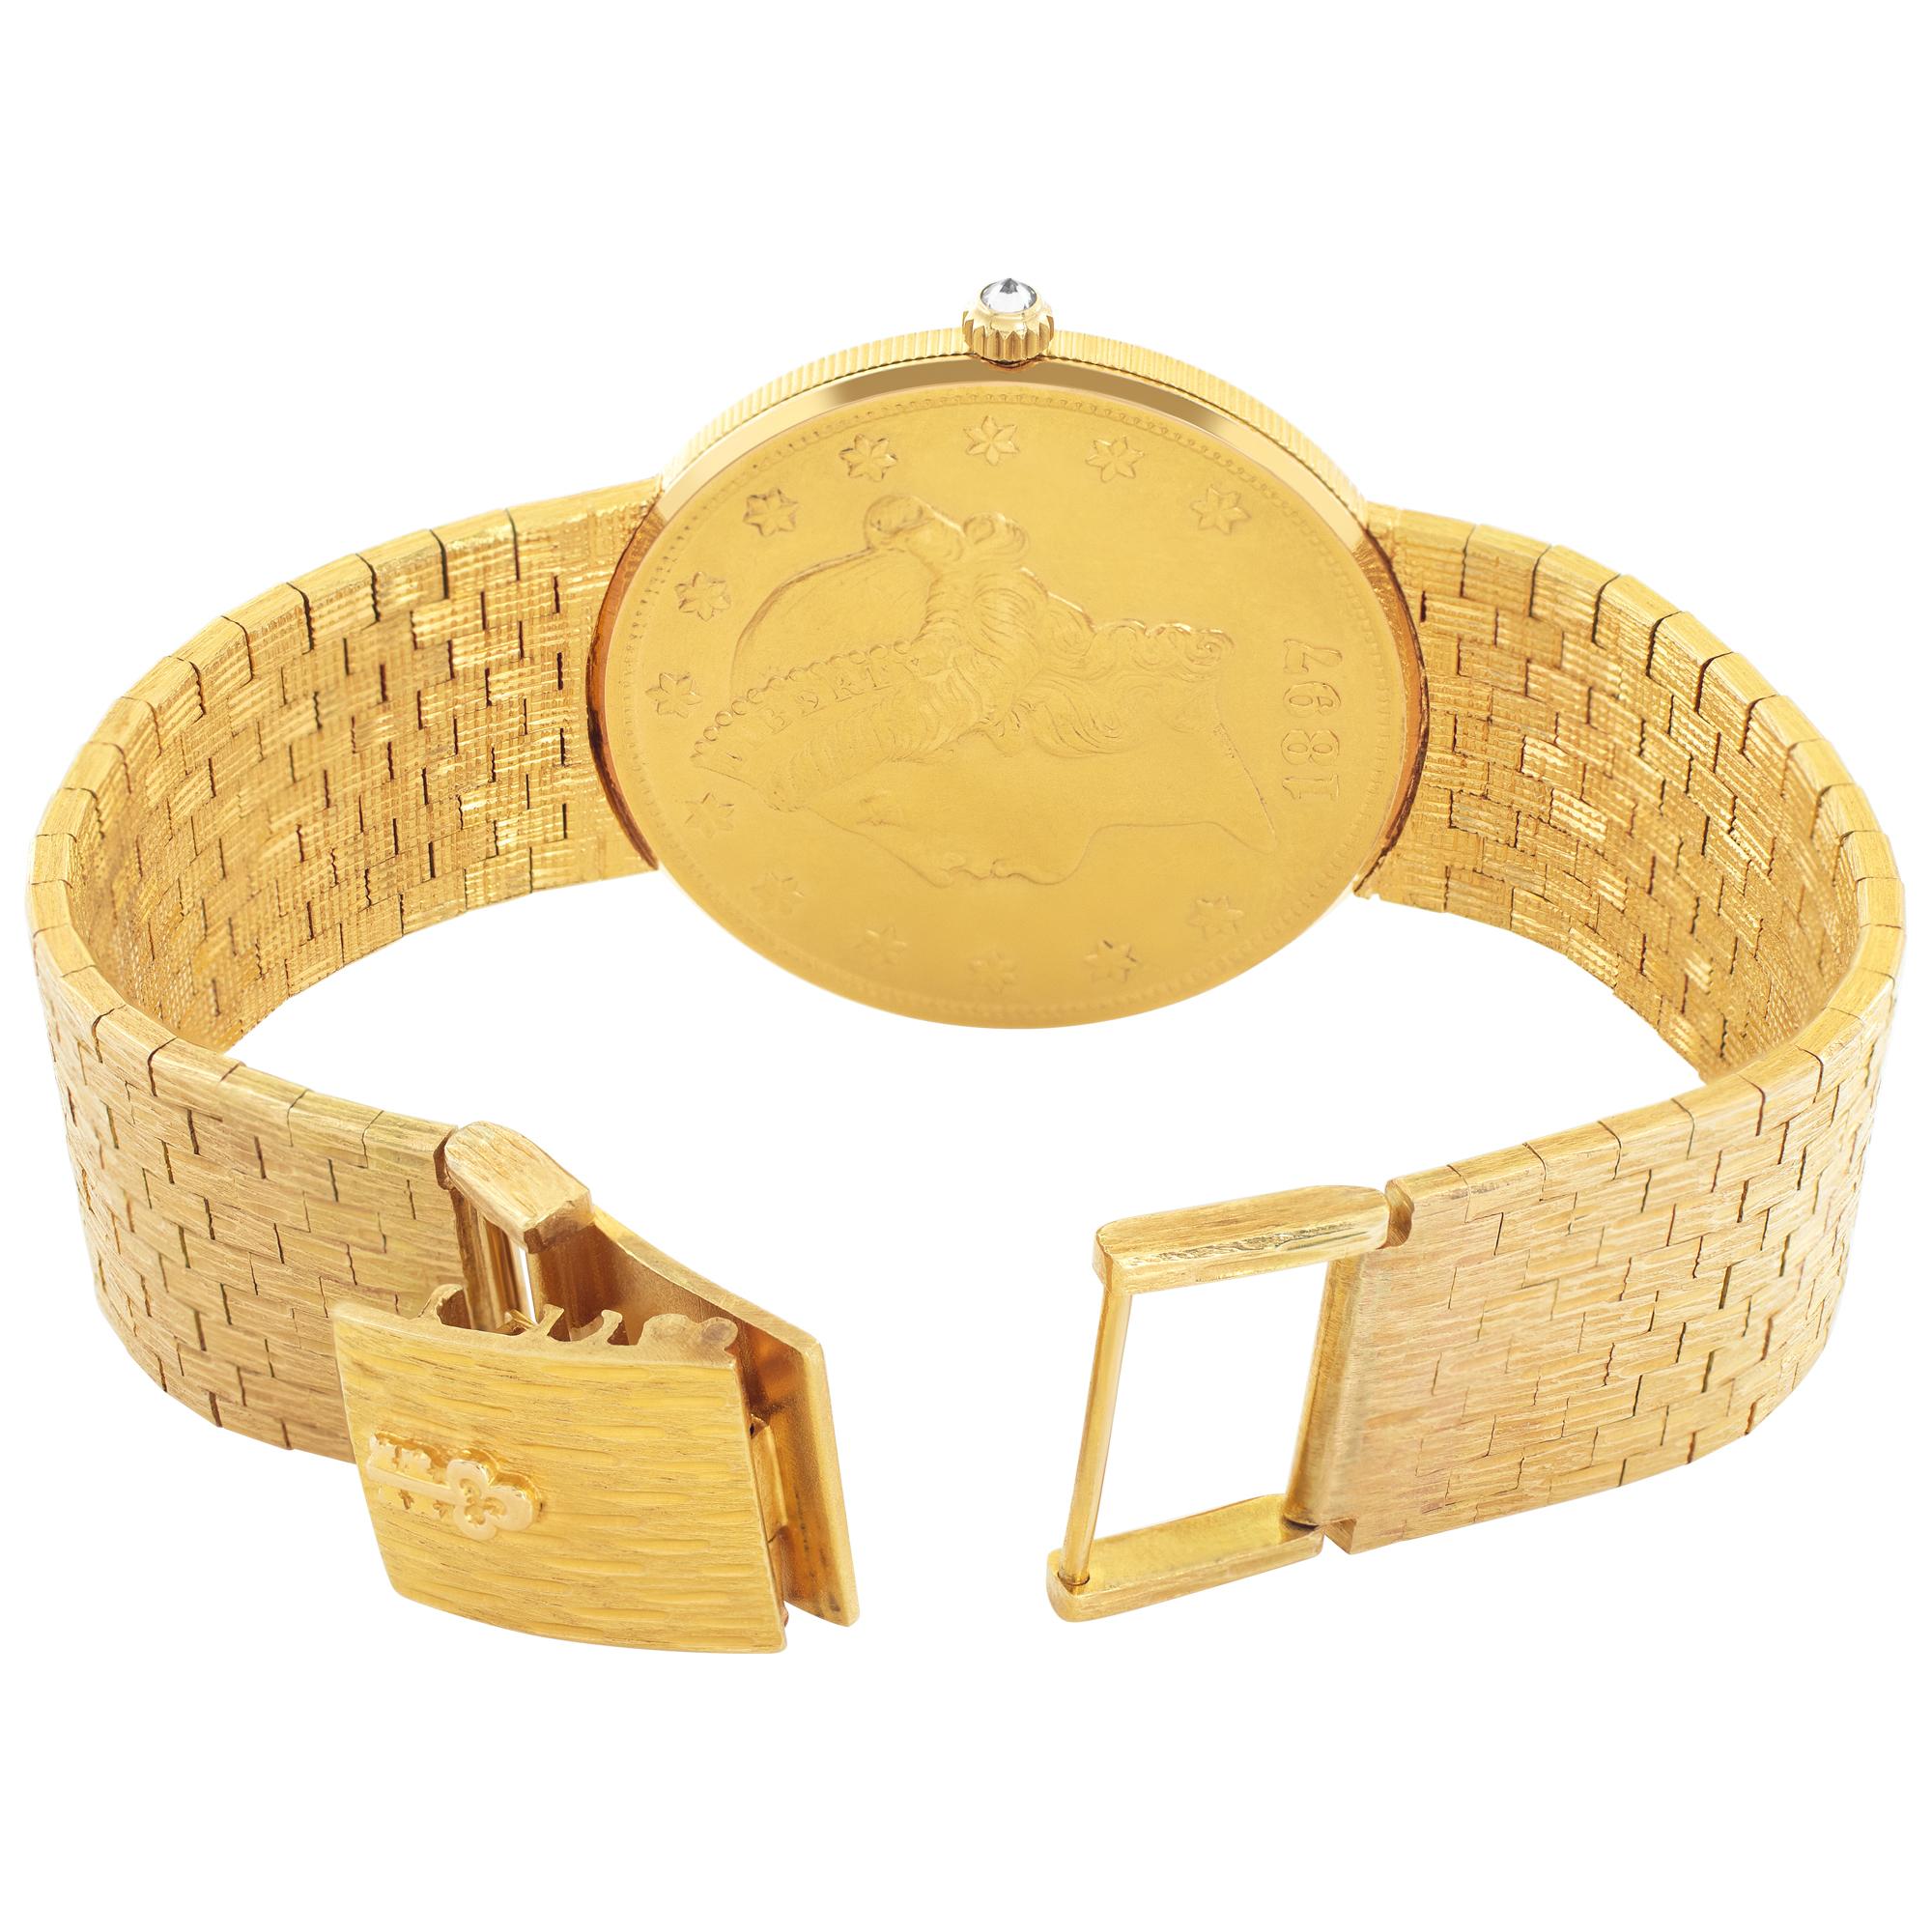 Women's or Men's Corum $20 gold piece 5014556 in yellow gold with a Gold dial 35mm Quartz watch For Sale